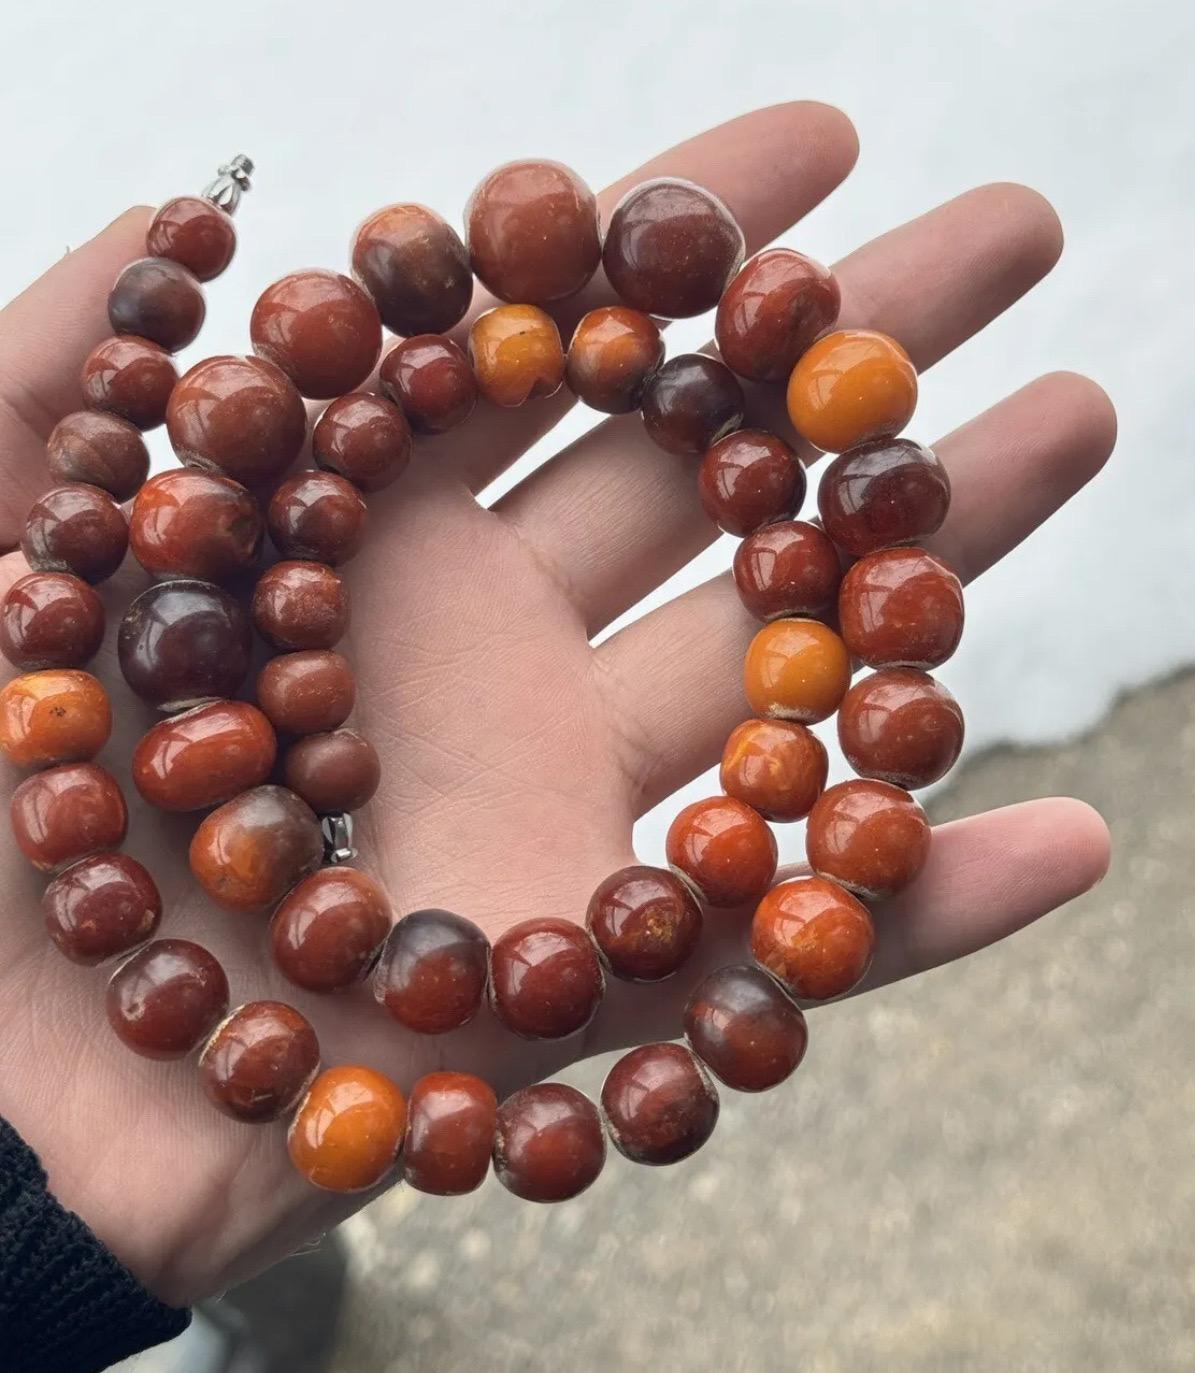 This beautiful necklace is a one-of-a-kind piece made from 72 grams of rare and fine butterscotch amber. This necklace is perfect for anyone who loves unique and eye-catching jewelry.. Don't let this rare piece pass you by! Total weight is 72 grams.